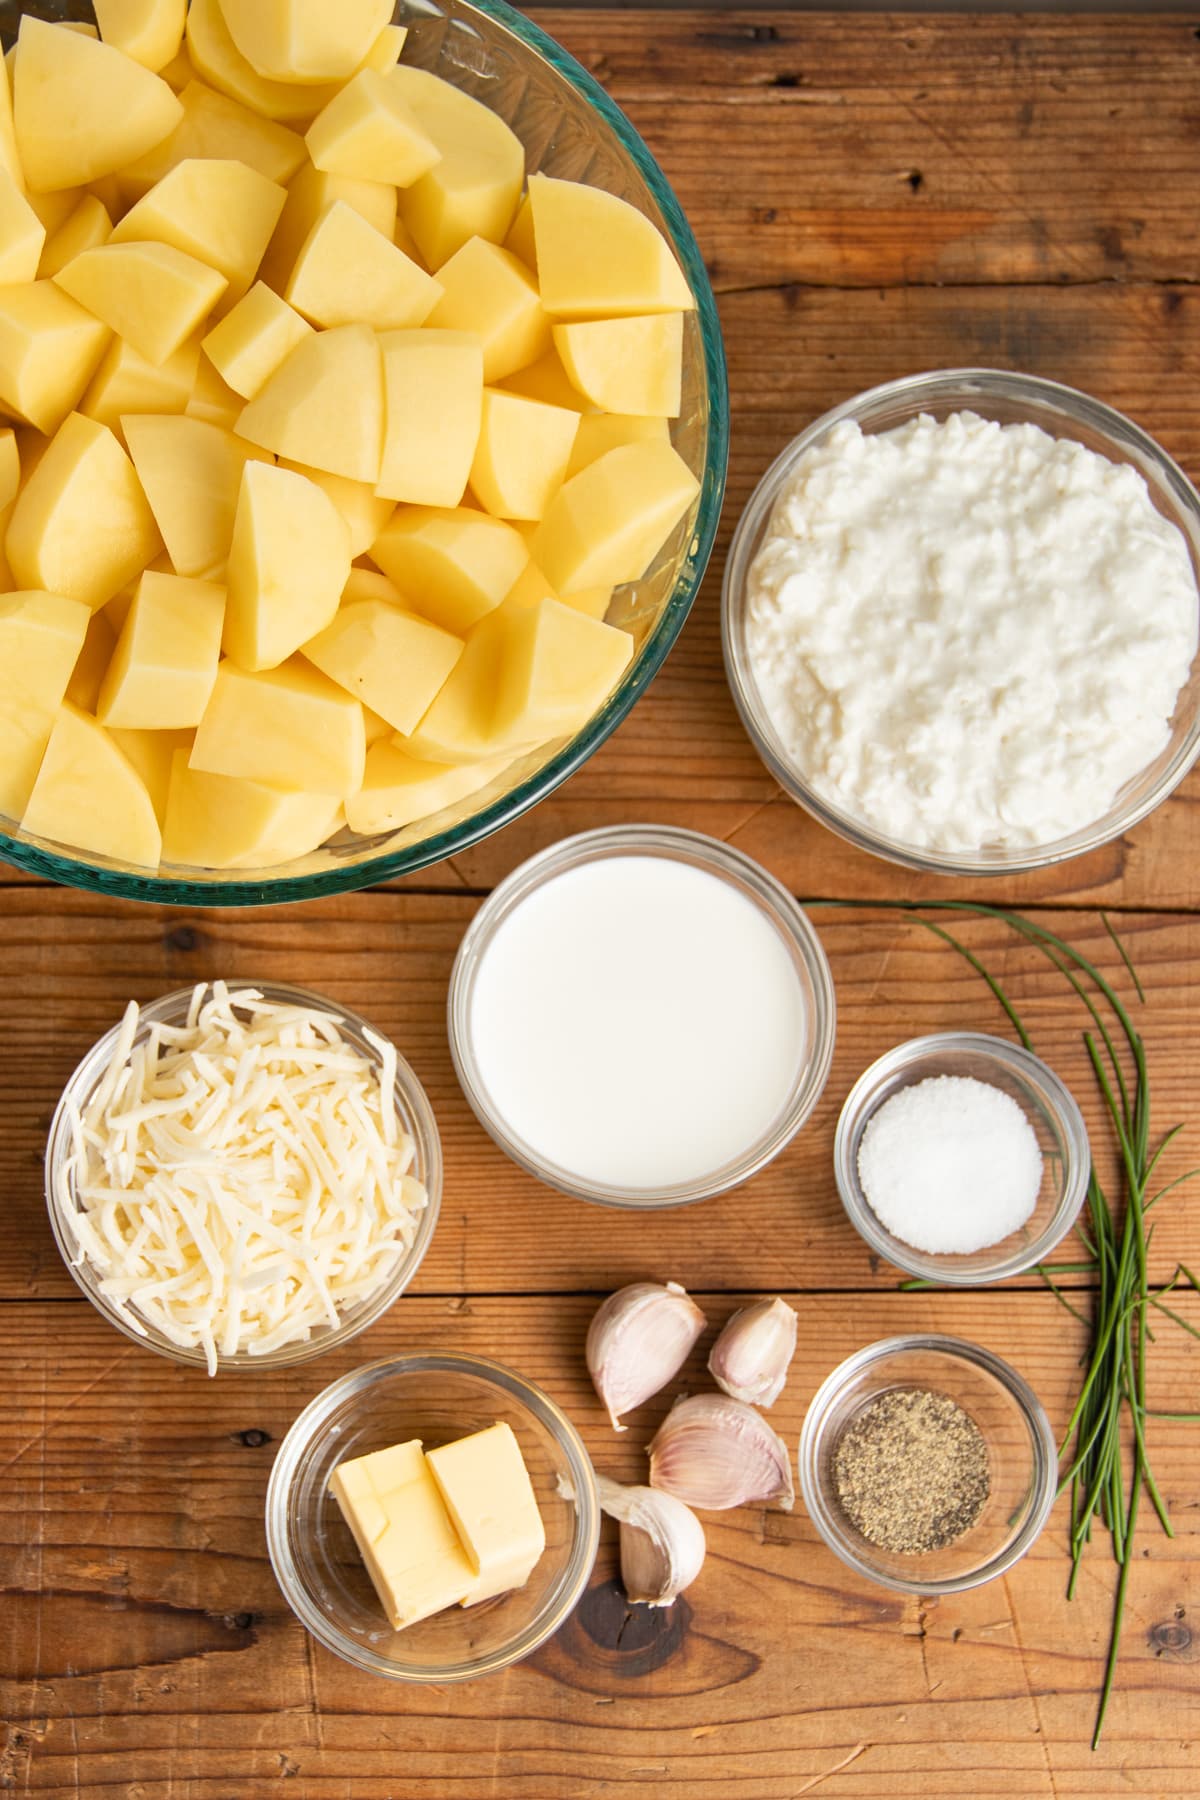 This is a picture of the ingredients to make the mashed potatoes.